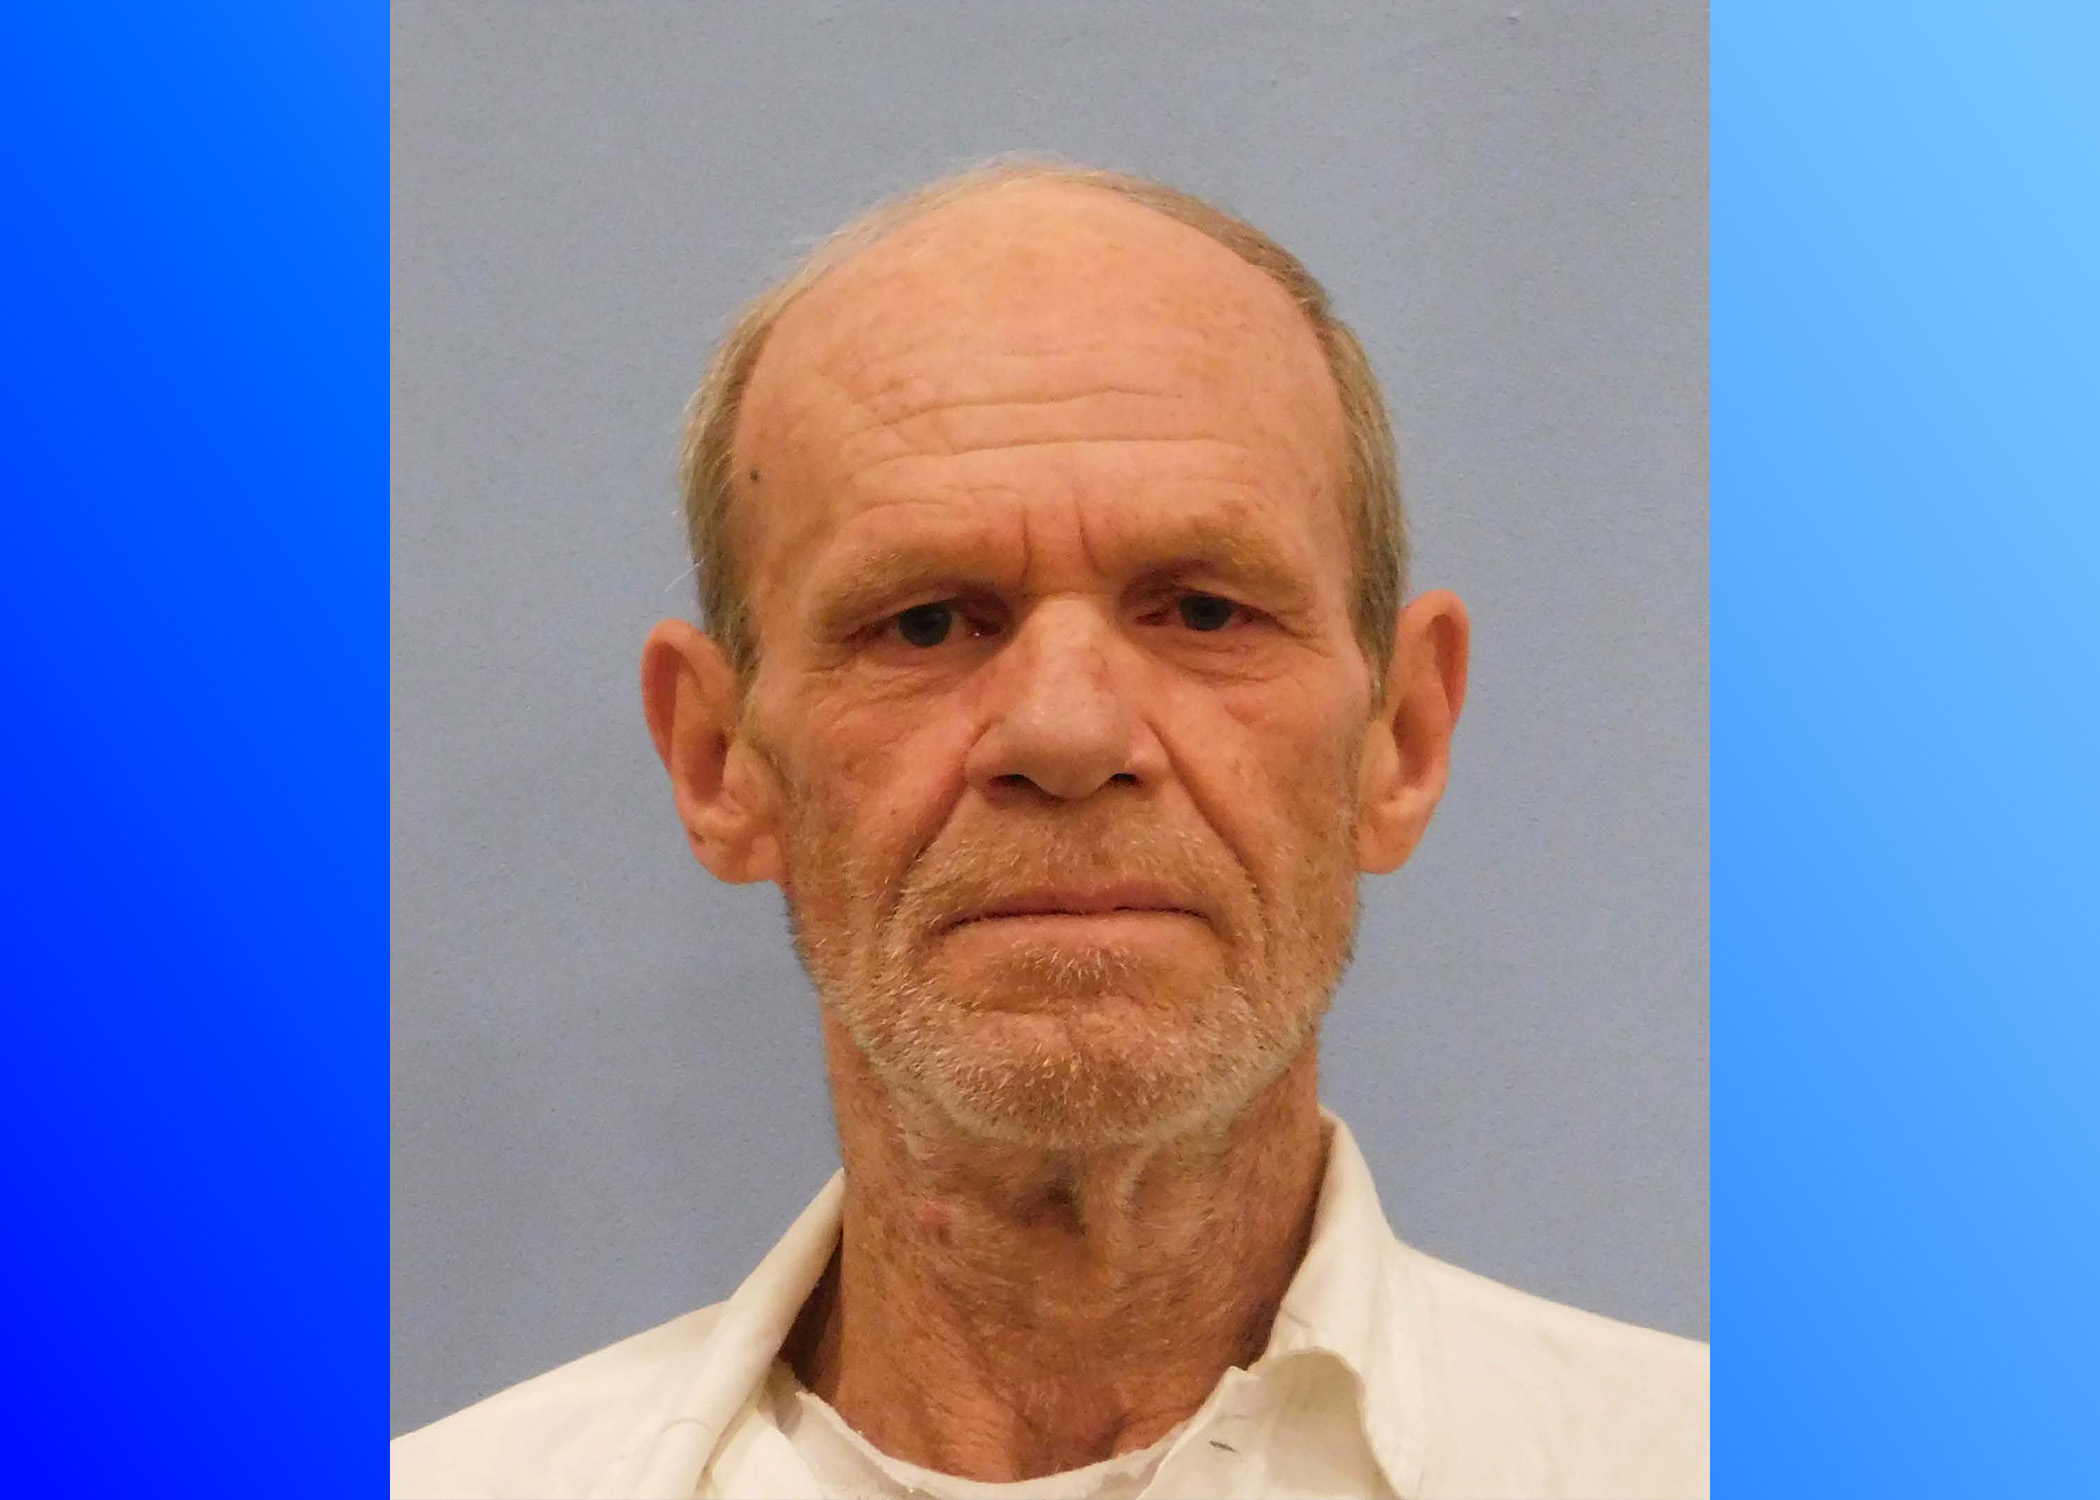 Family sought for deceased William Donaldson Correctional Facility inmate